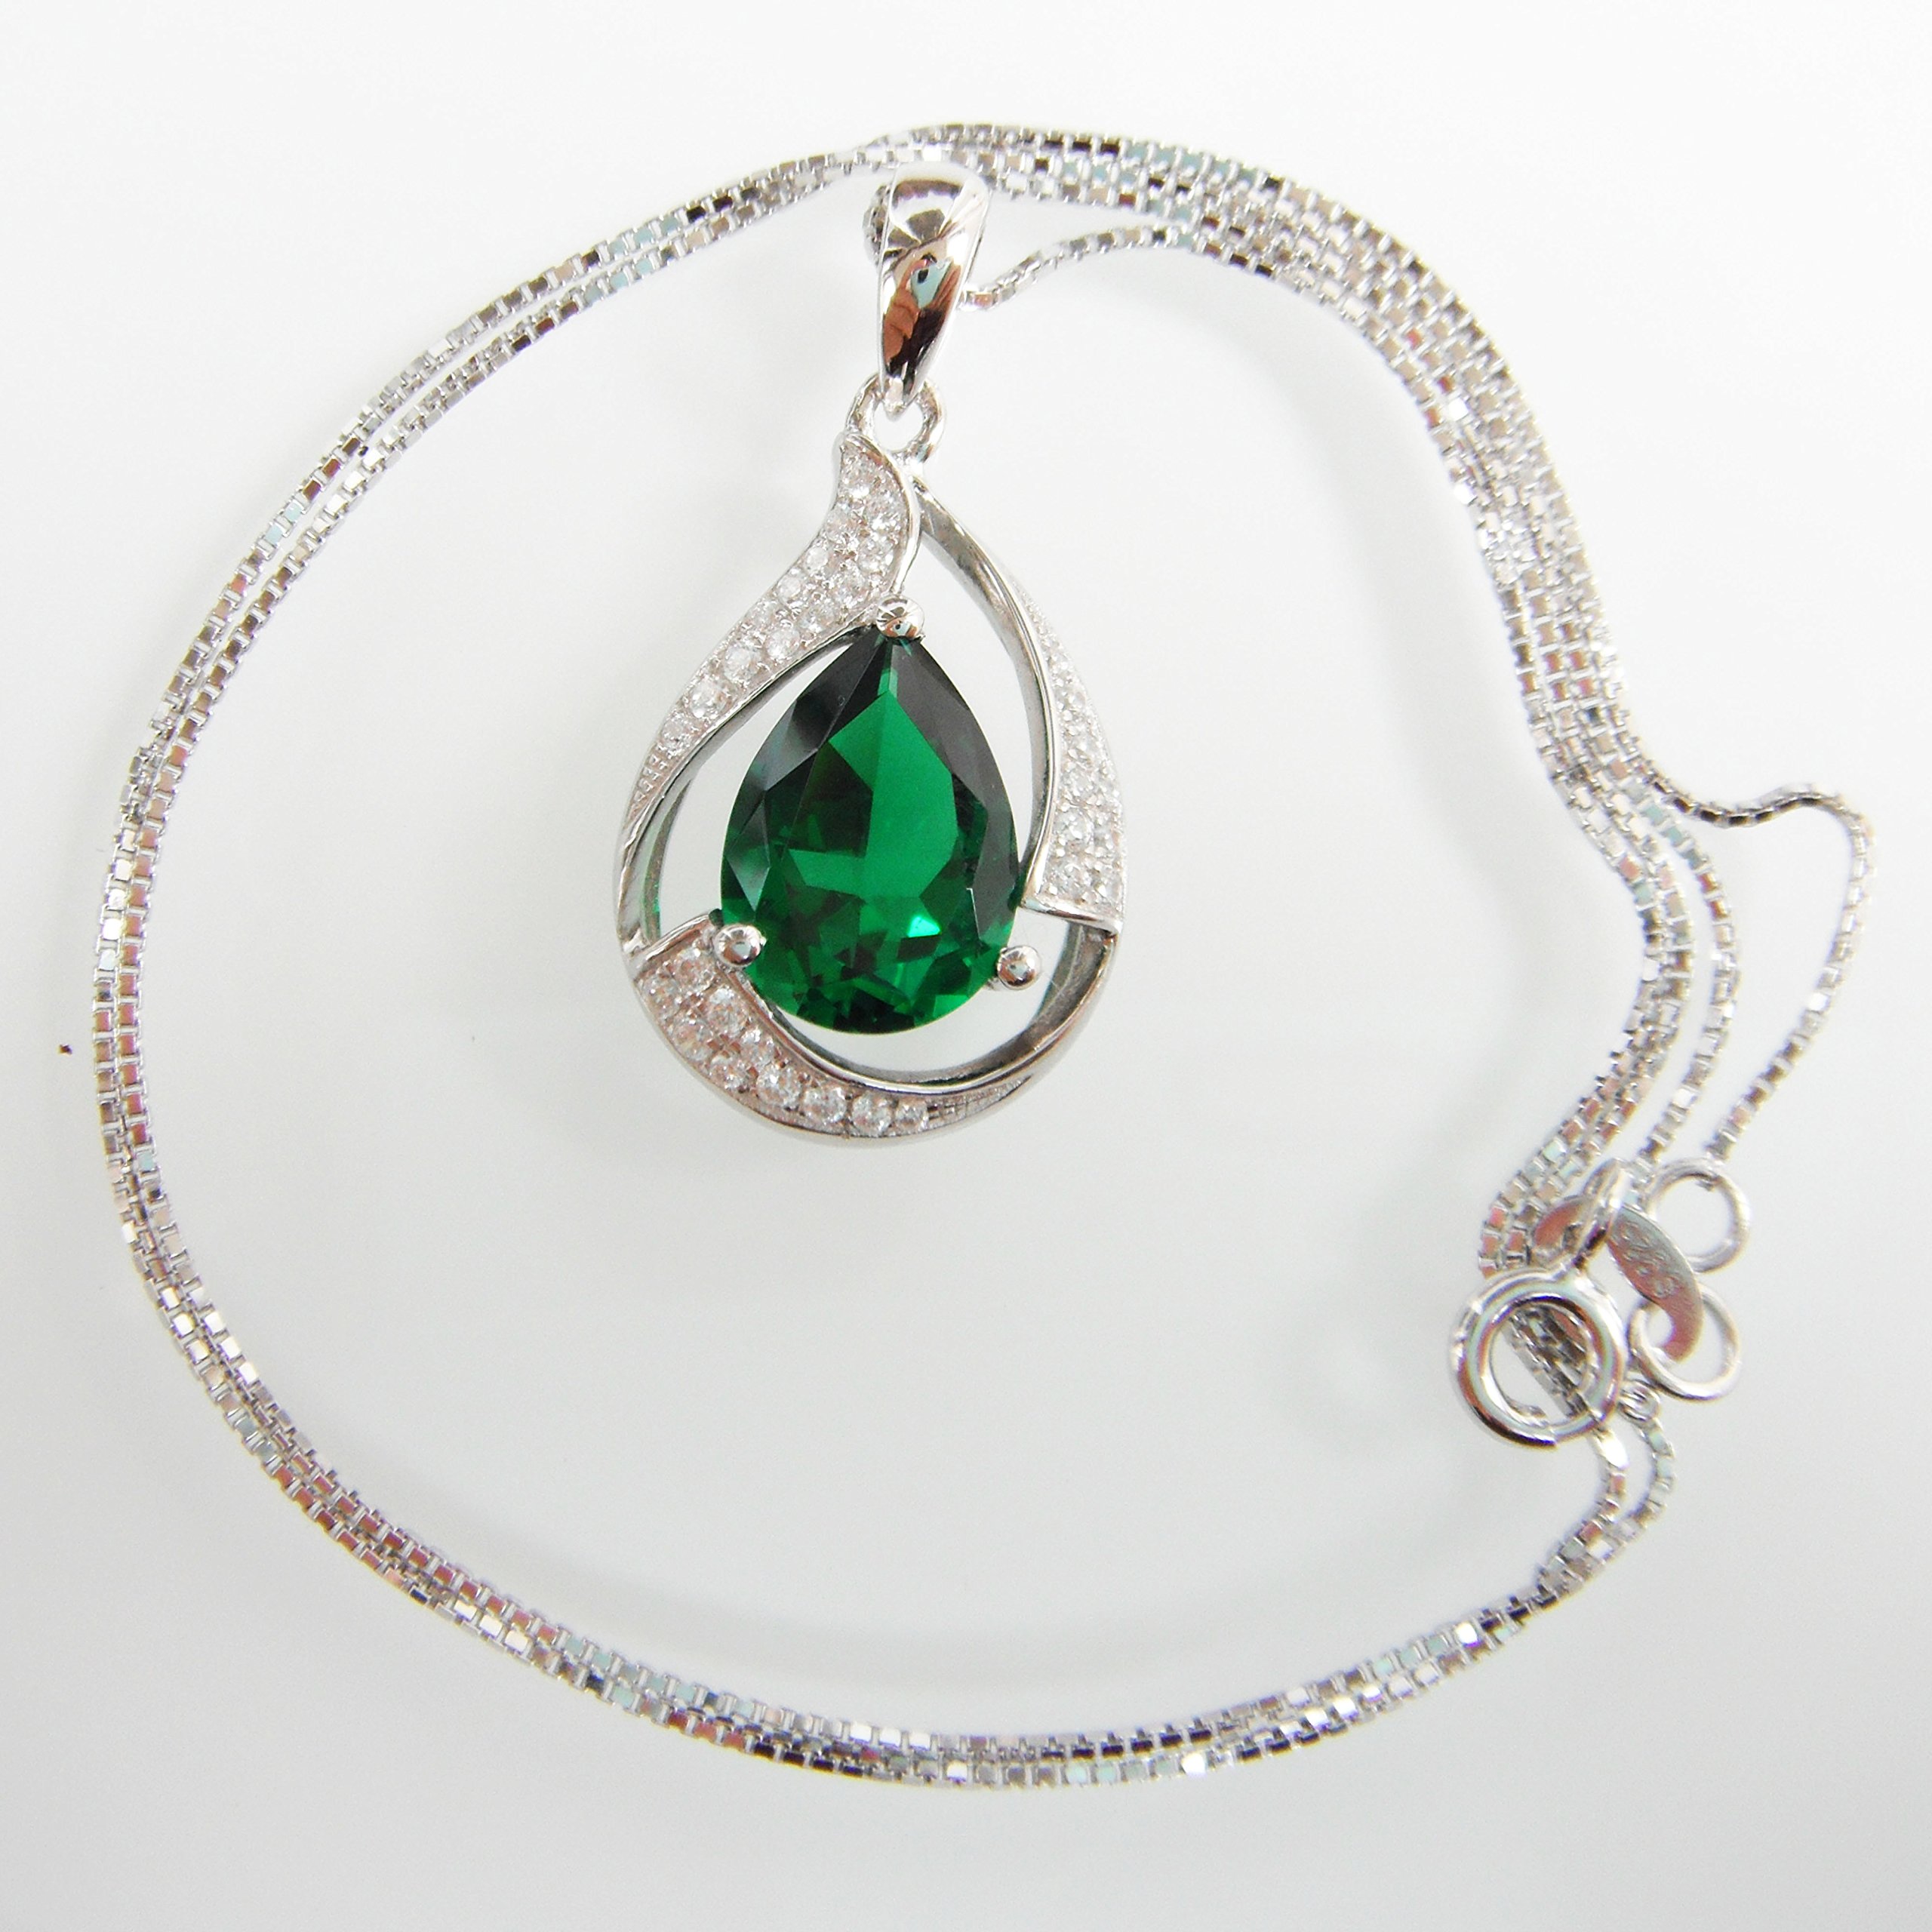 Navachi 925 Sterling Silver 18k White Gold Plated 3.5ct Pear Emerald Or Ruby Necklace Pendant 18